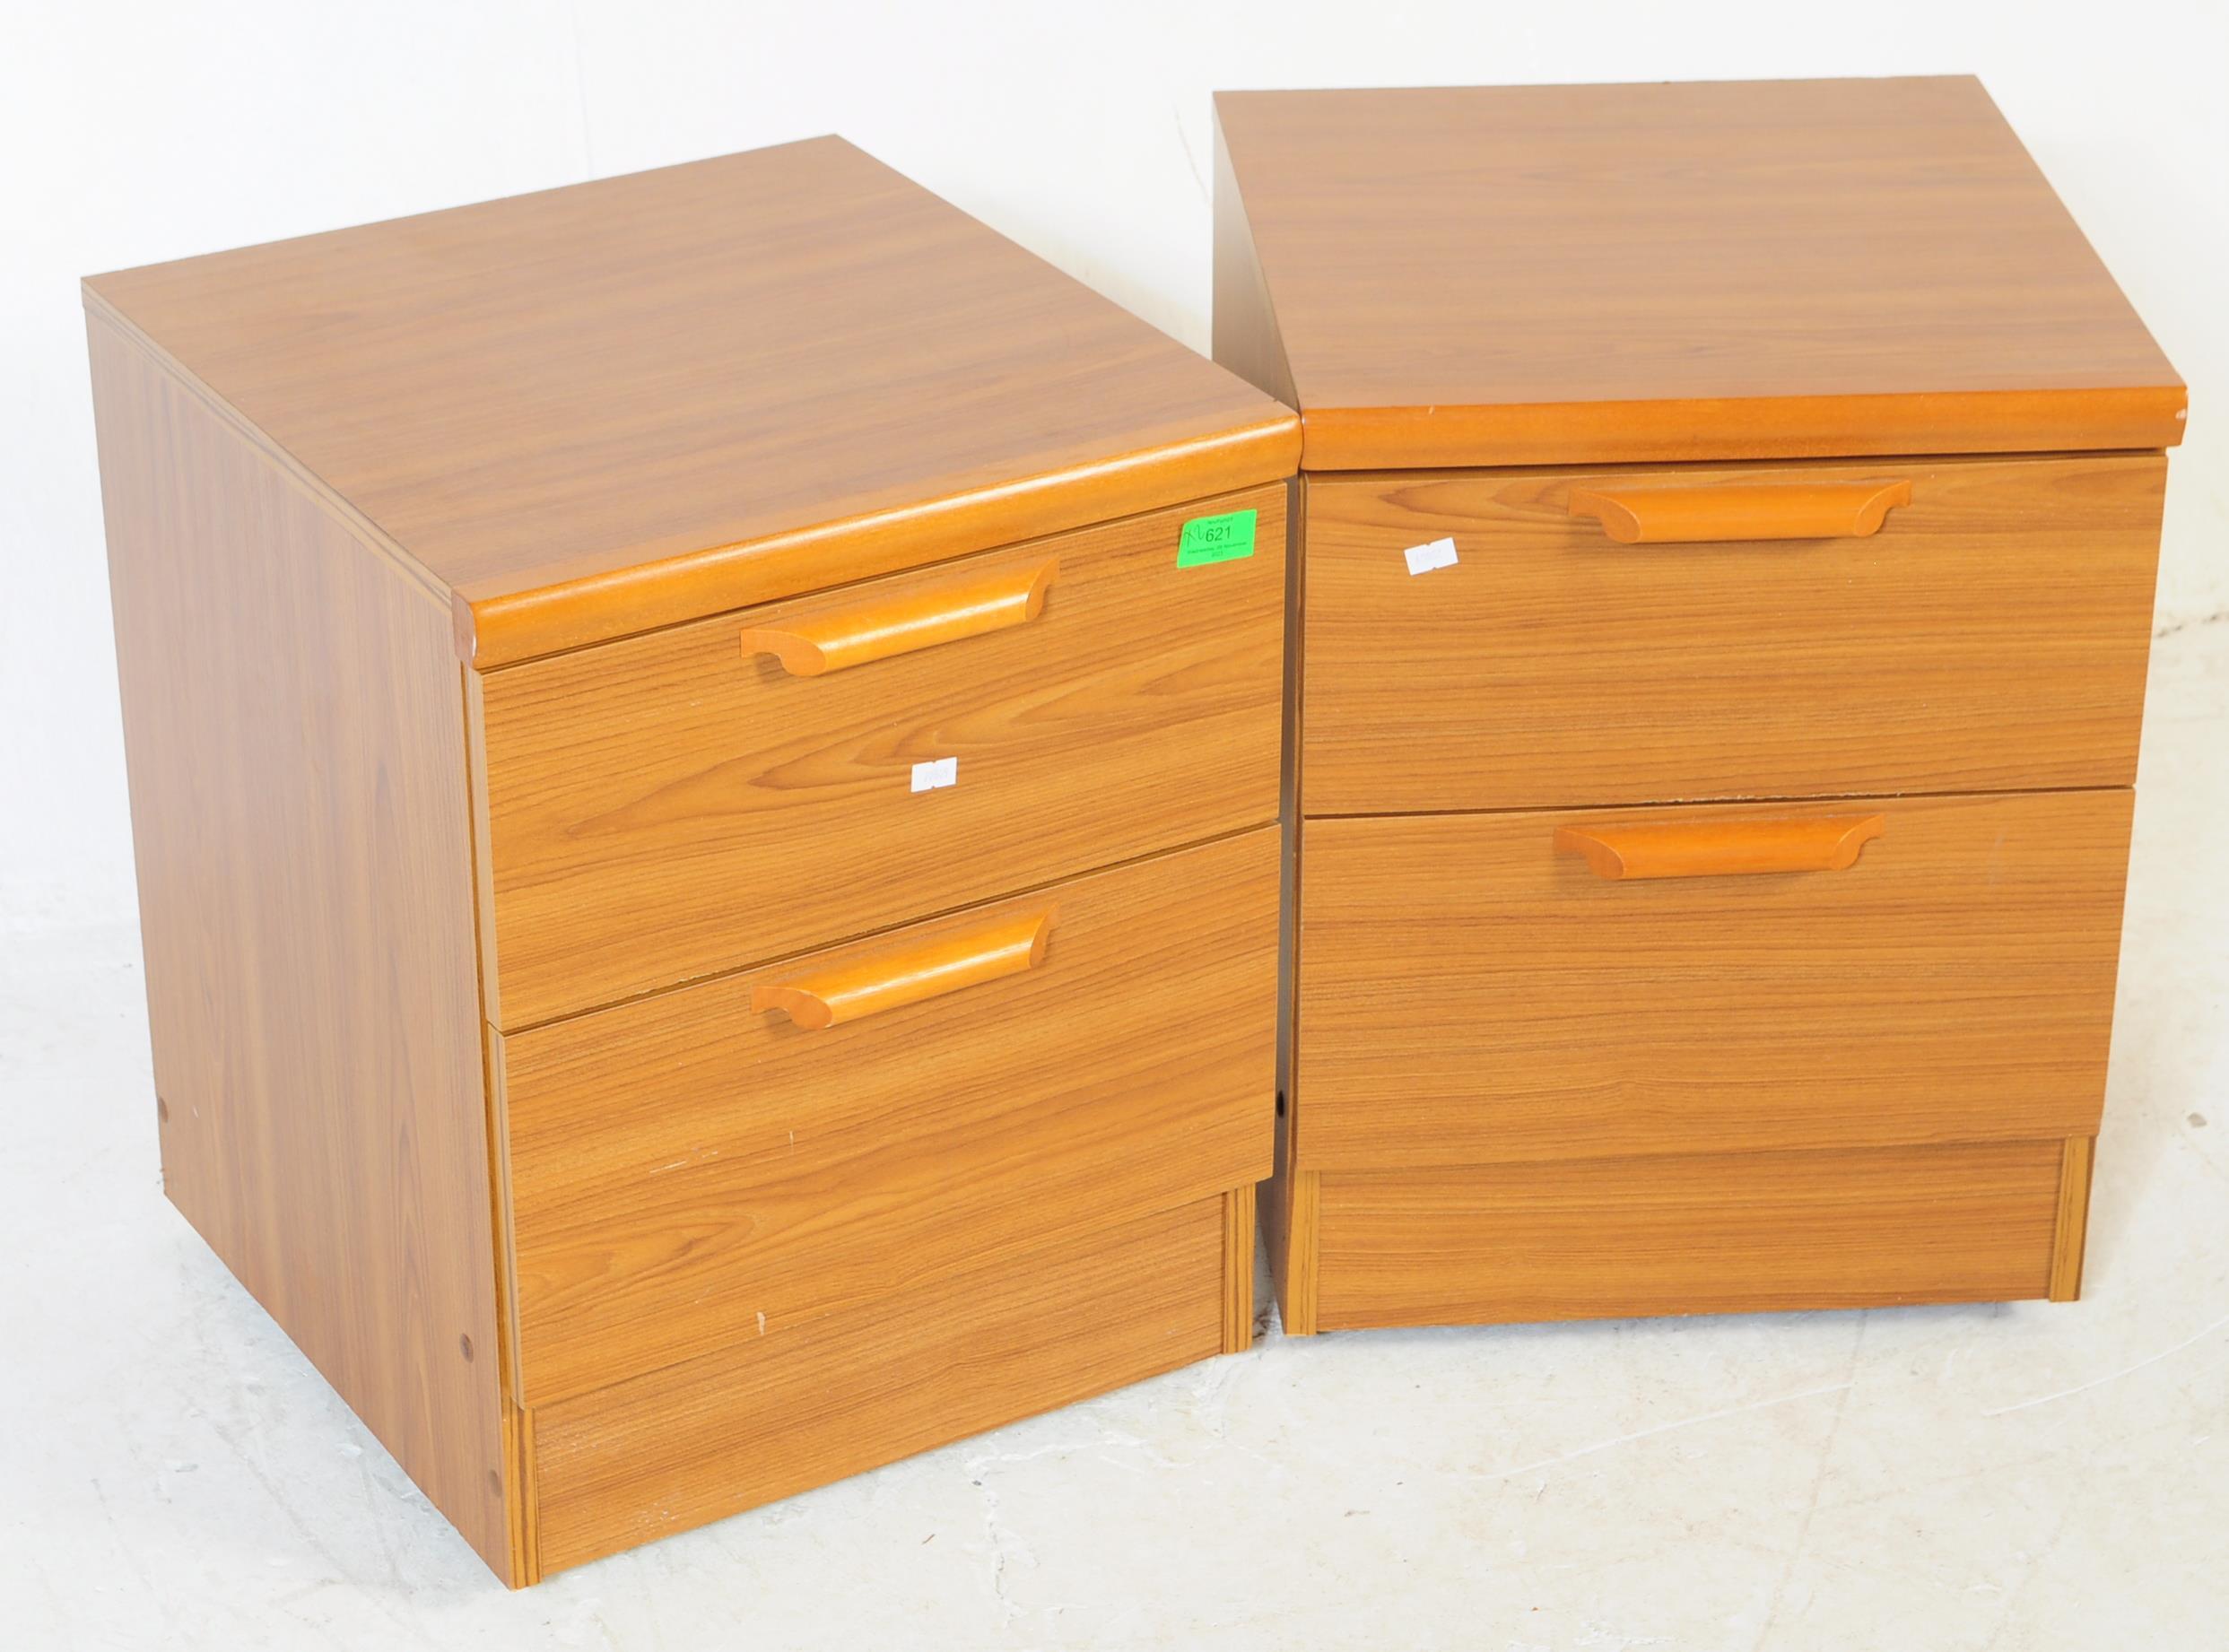 PAIR OF MID CENTURY TEAK BEDSIDE CABINETS - Image 2 of 5